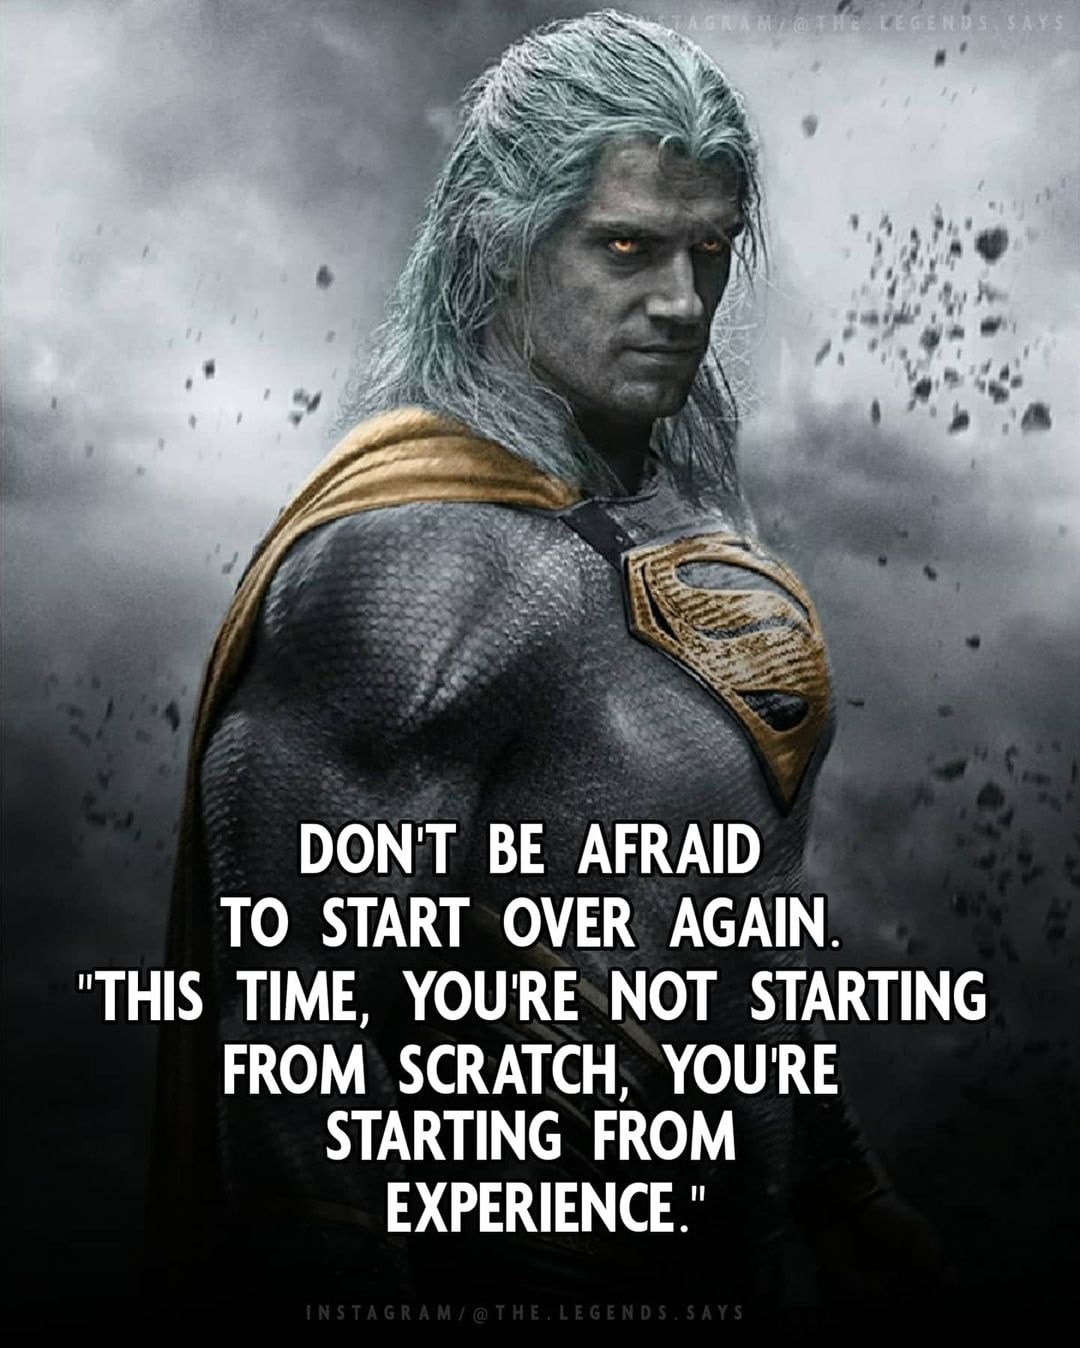 Don’t be afraid to start again. This time, you’re not starting from scratch. You’re starting from experience